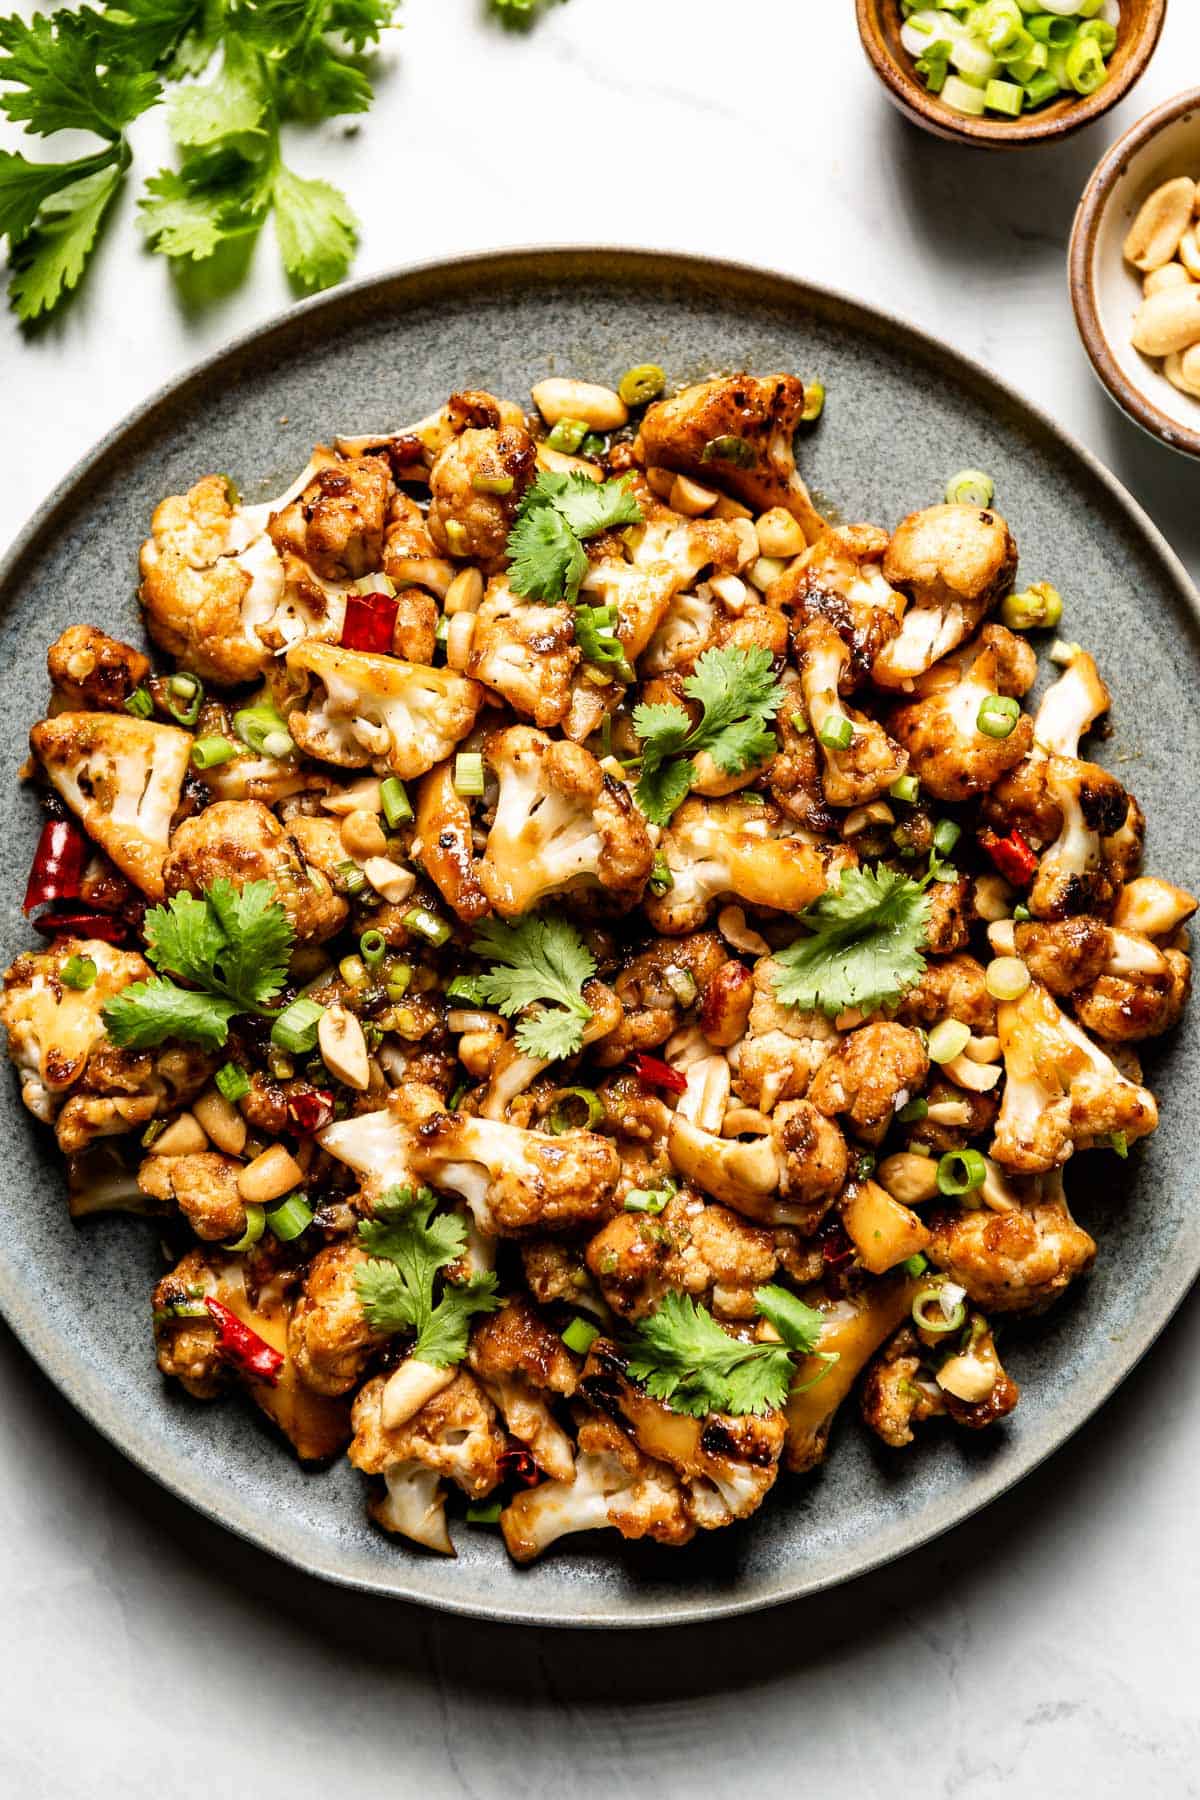 Kung Pao Cauliflower bites garnished with cilantro and peanuts from the top view